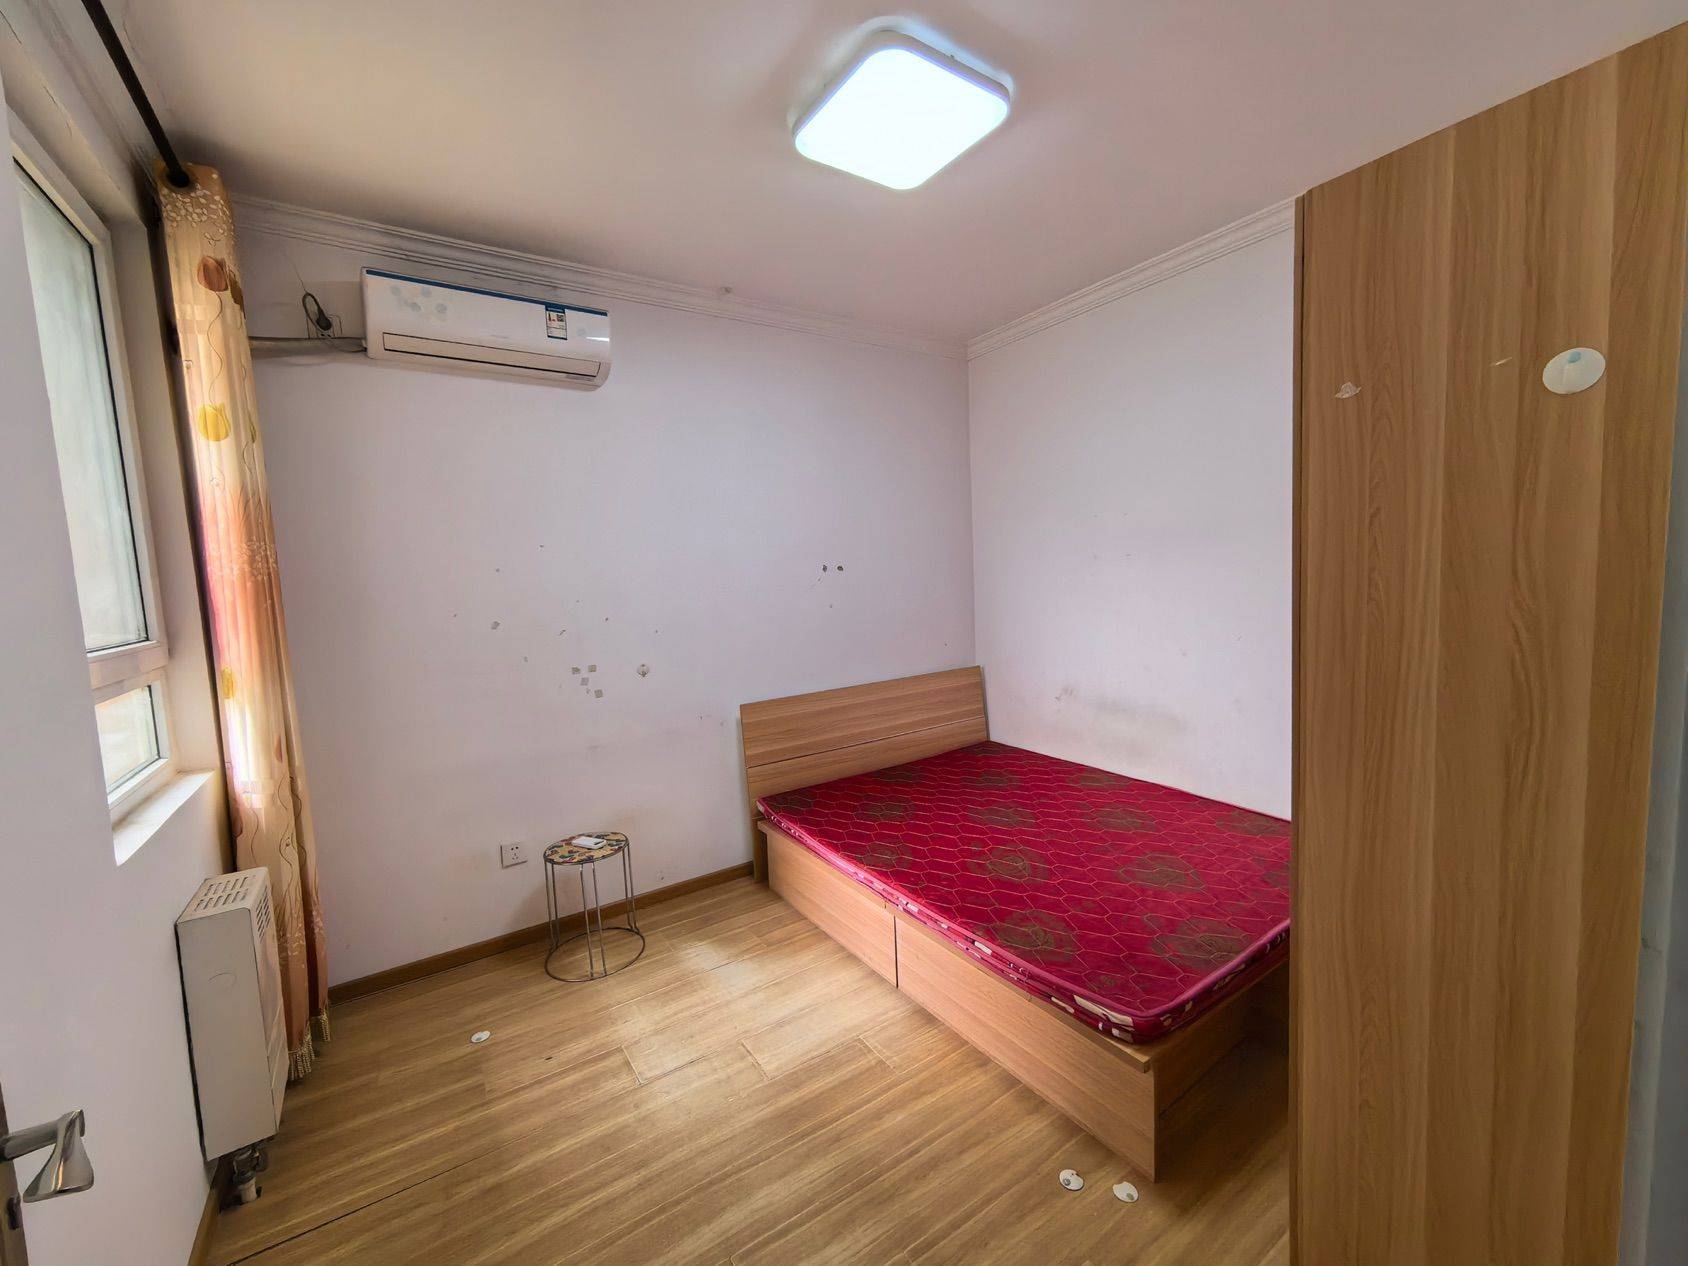 Beijing-Shunyi-Cozy Home,Clean&Comfy,No Gender Limit,Chilled